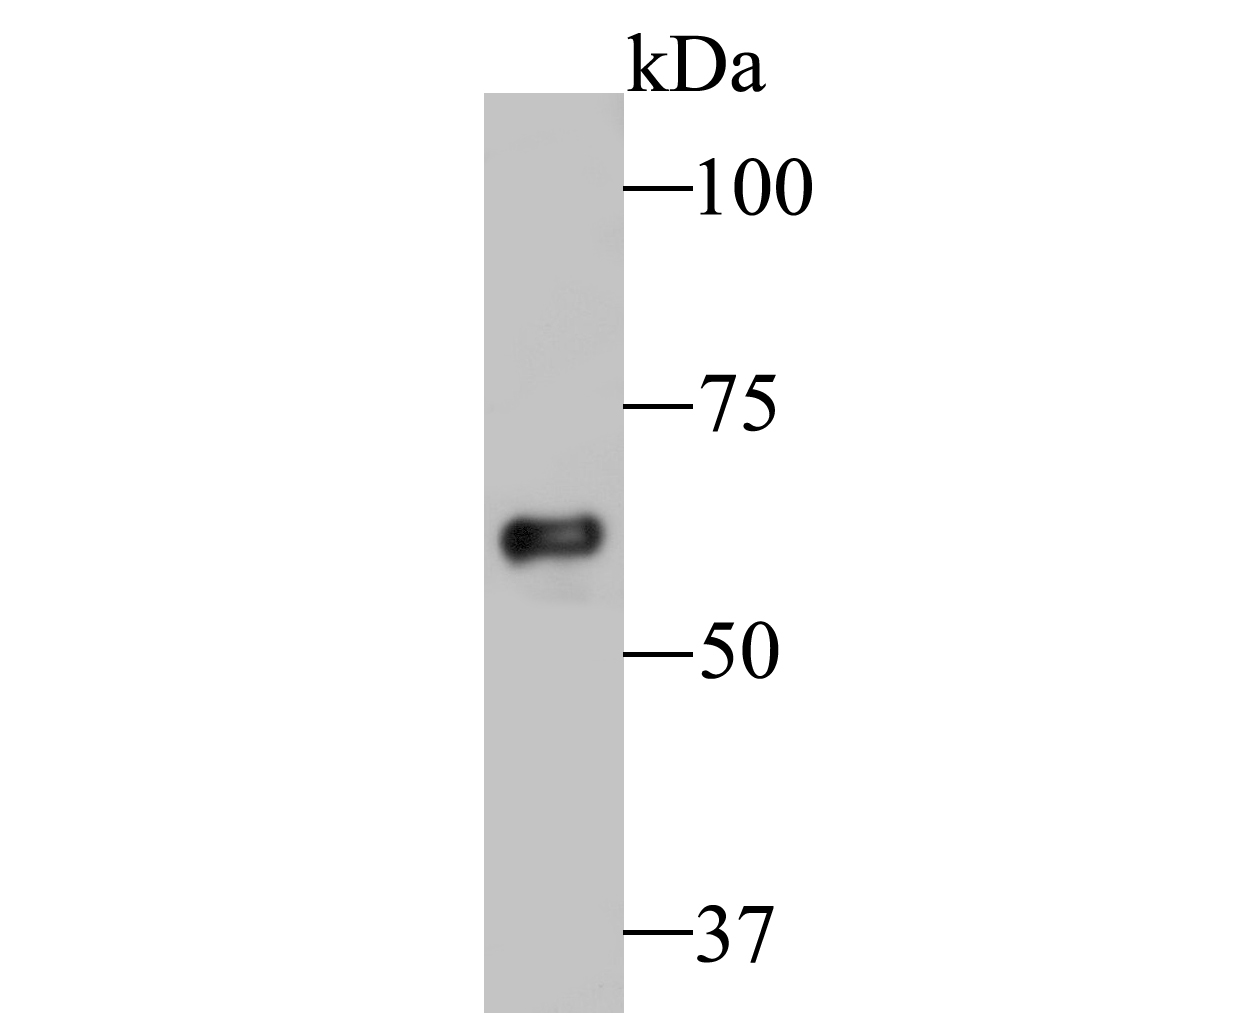 Western blot analysis of TCP1 alpha/CCTA on Daudi cell lysate. Proteins were transferred to a PVDF membrane and blocked with 5% BSA in PBS for 1 hour at room temperature. The primary antibody (ET7109-79, 1/500) was used in 5% BSA at room temperature for 2 hours. Goat Anti-Rabbit IgG - HRP Secondary Antibody (HA1001) at 1:5,000 dilution was used for 1 hour at room temperature.